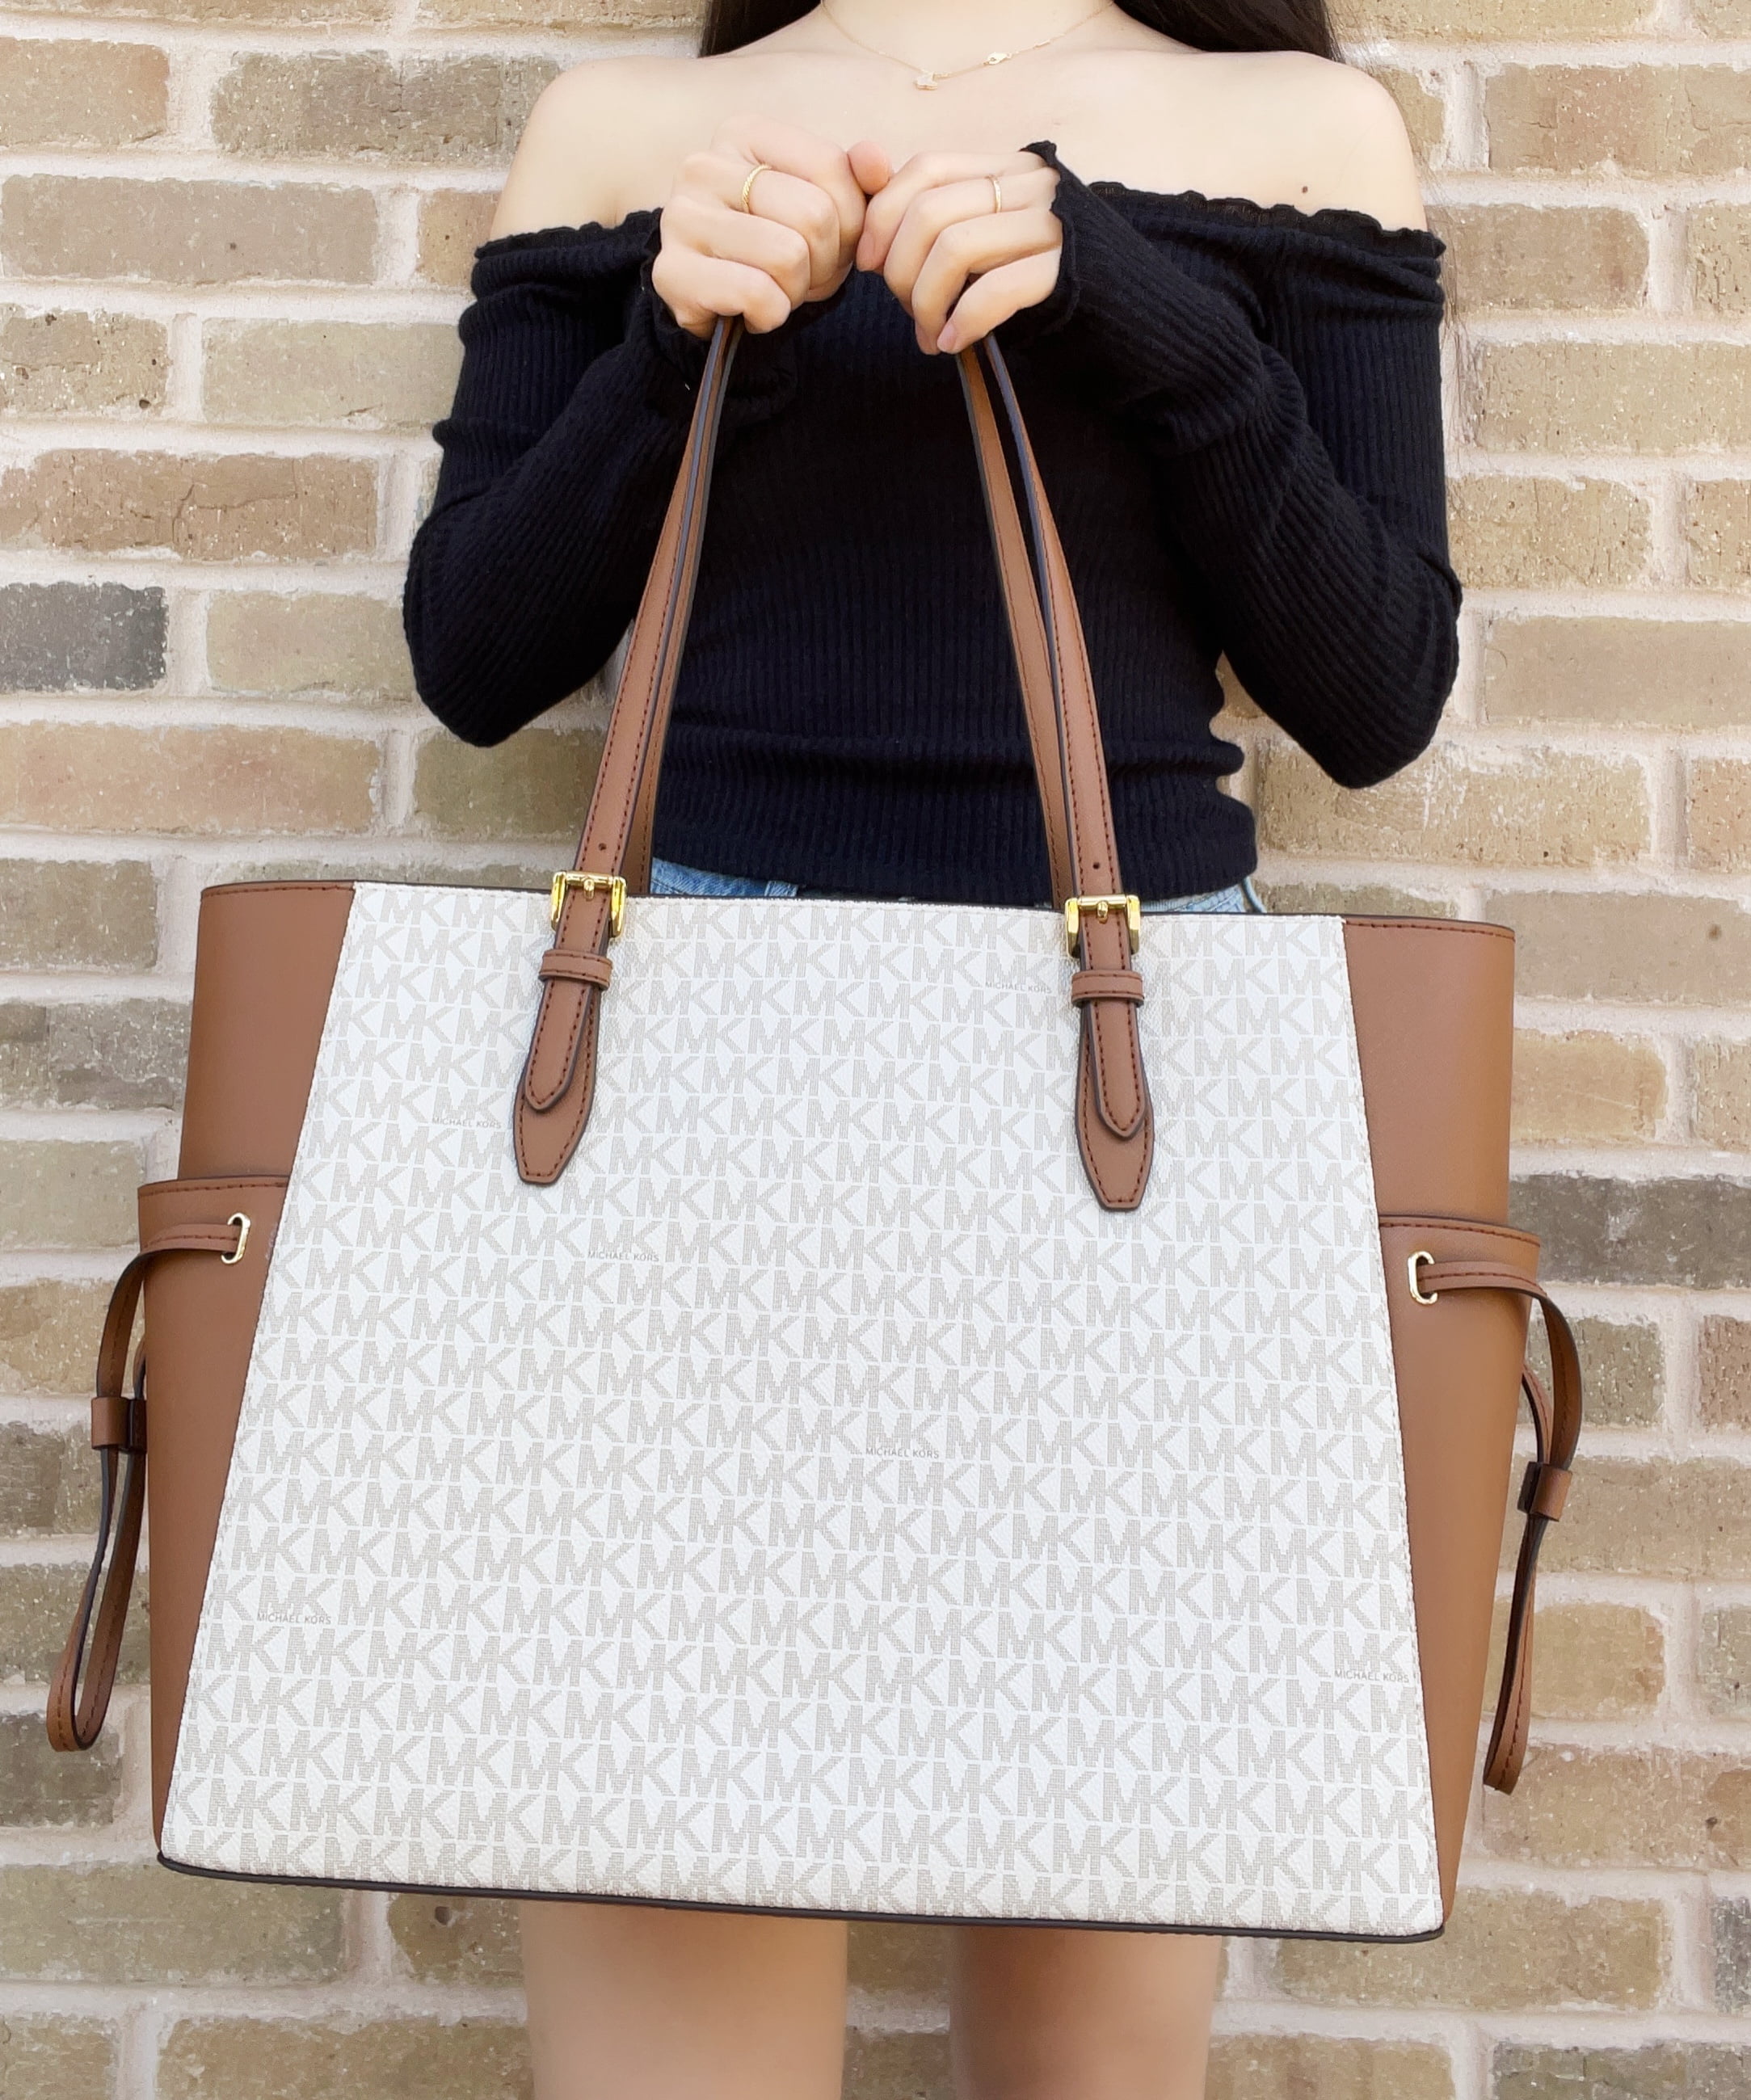 HealthdesignShops, Complete your outfit with the classy and chic ® Gillian  Girlfriend Carryall Tote